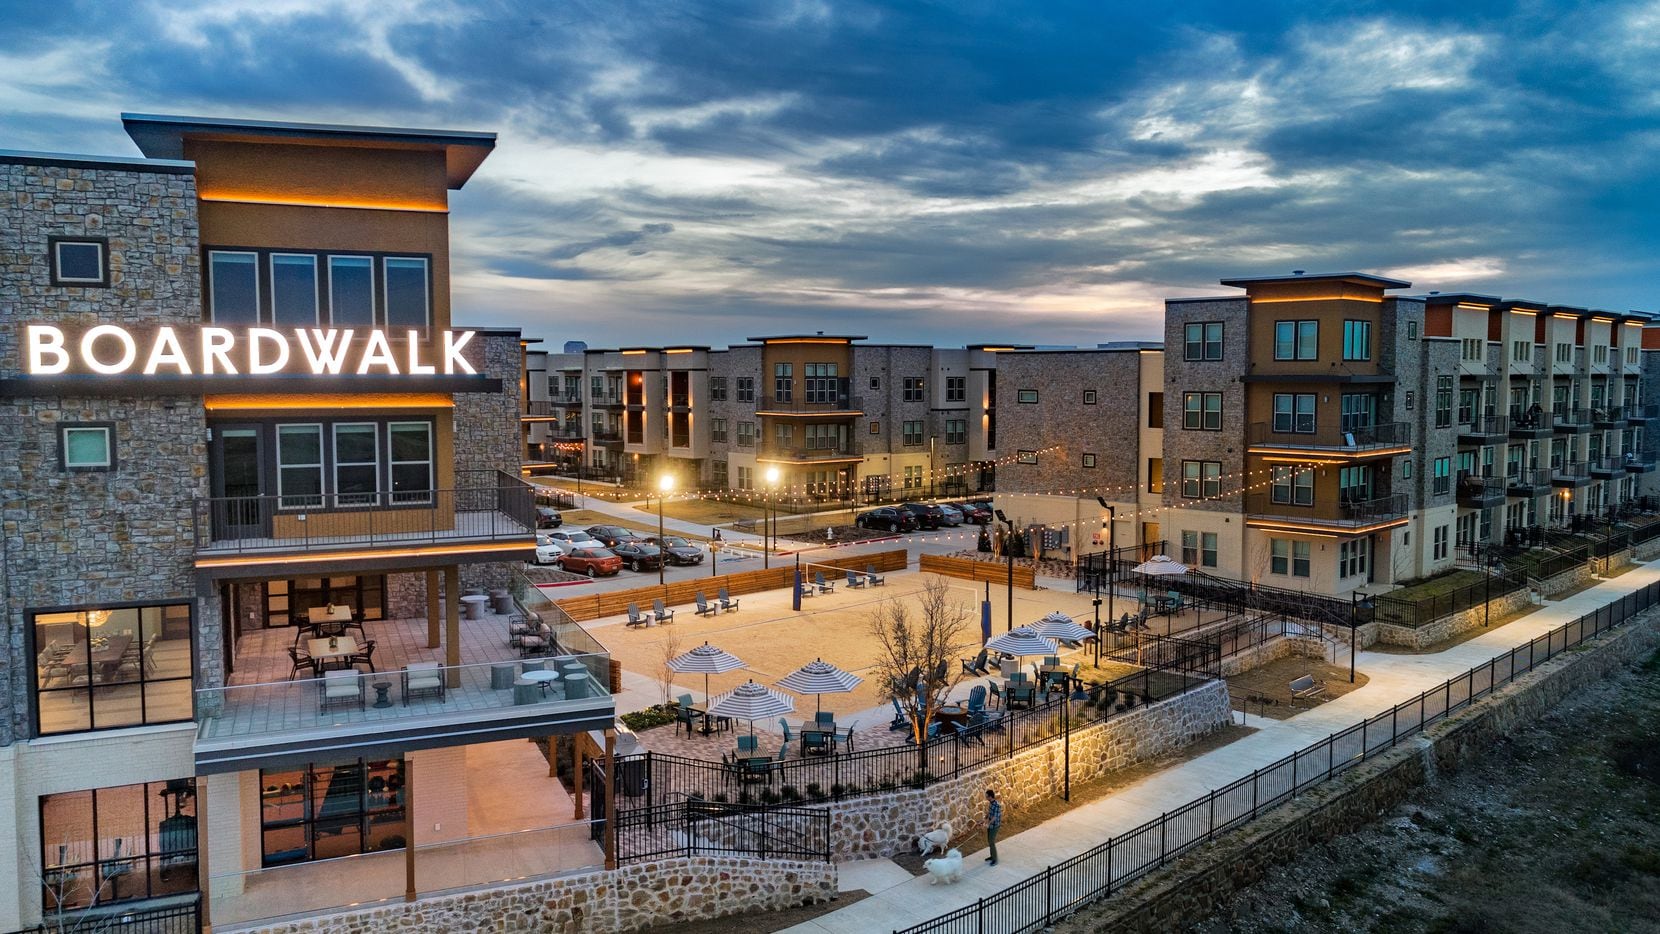 JPI has built thousands of North Texas apartments, including the Jefferson Boardwalk apartments in Farmers Branch.